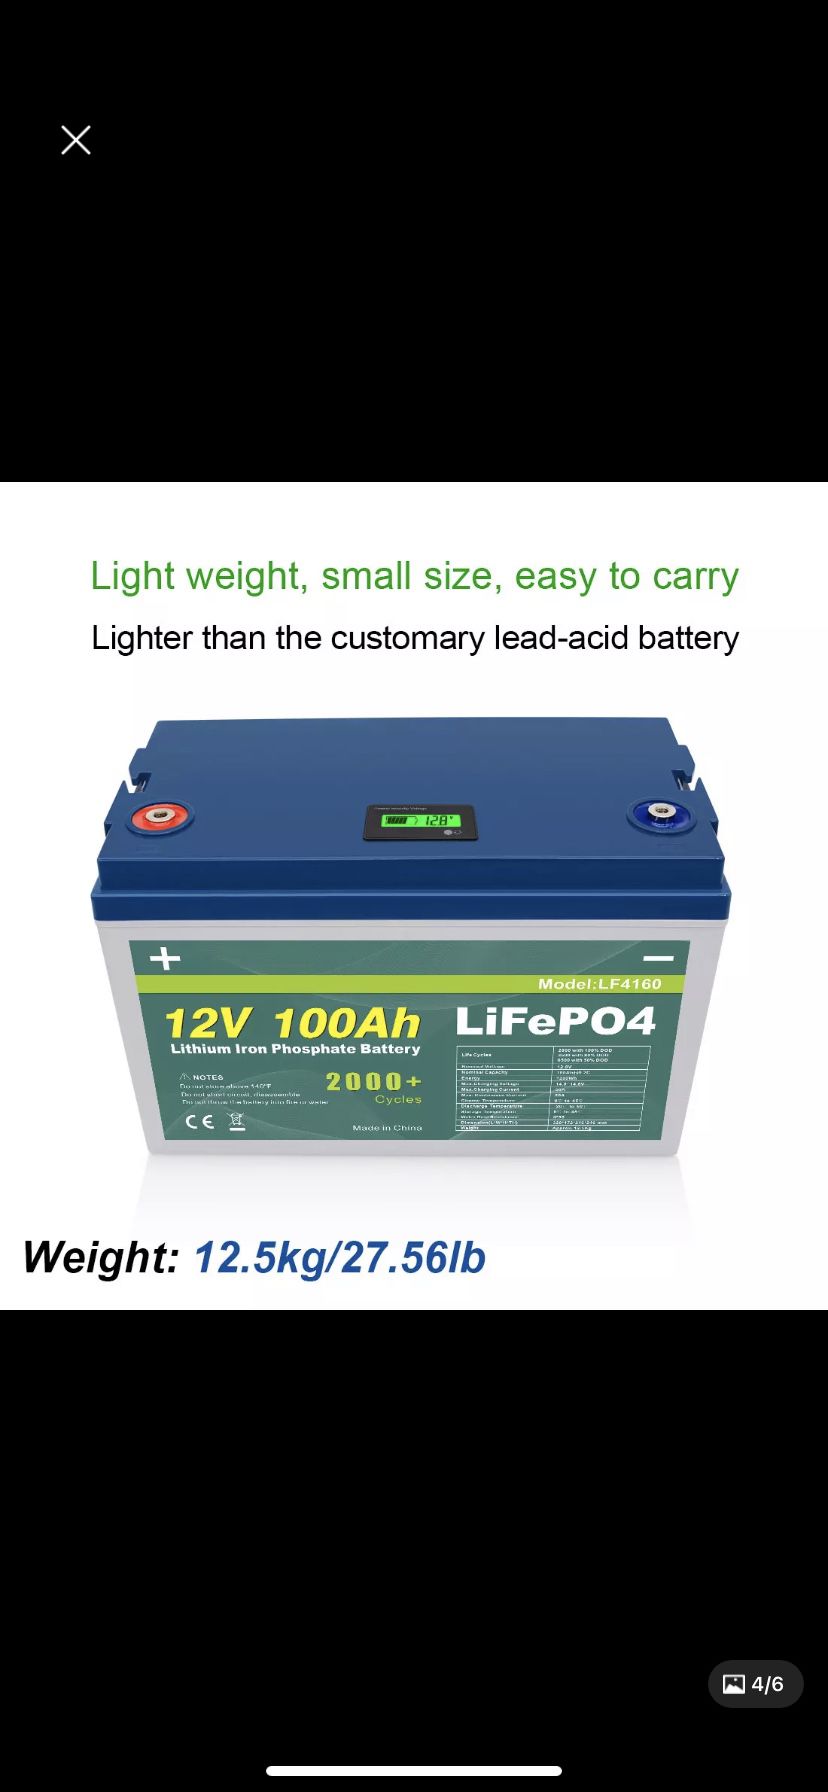 Photo Lithium iron phosphate 12v 100ah 1280wh 2000 cycles built in the BMS.